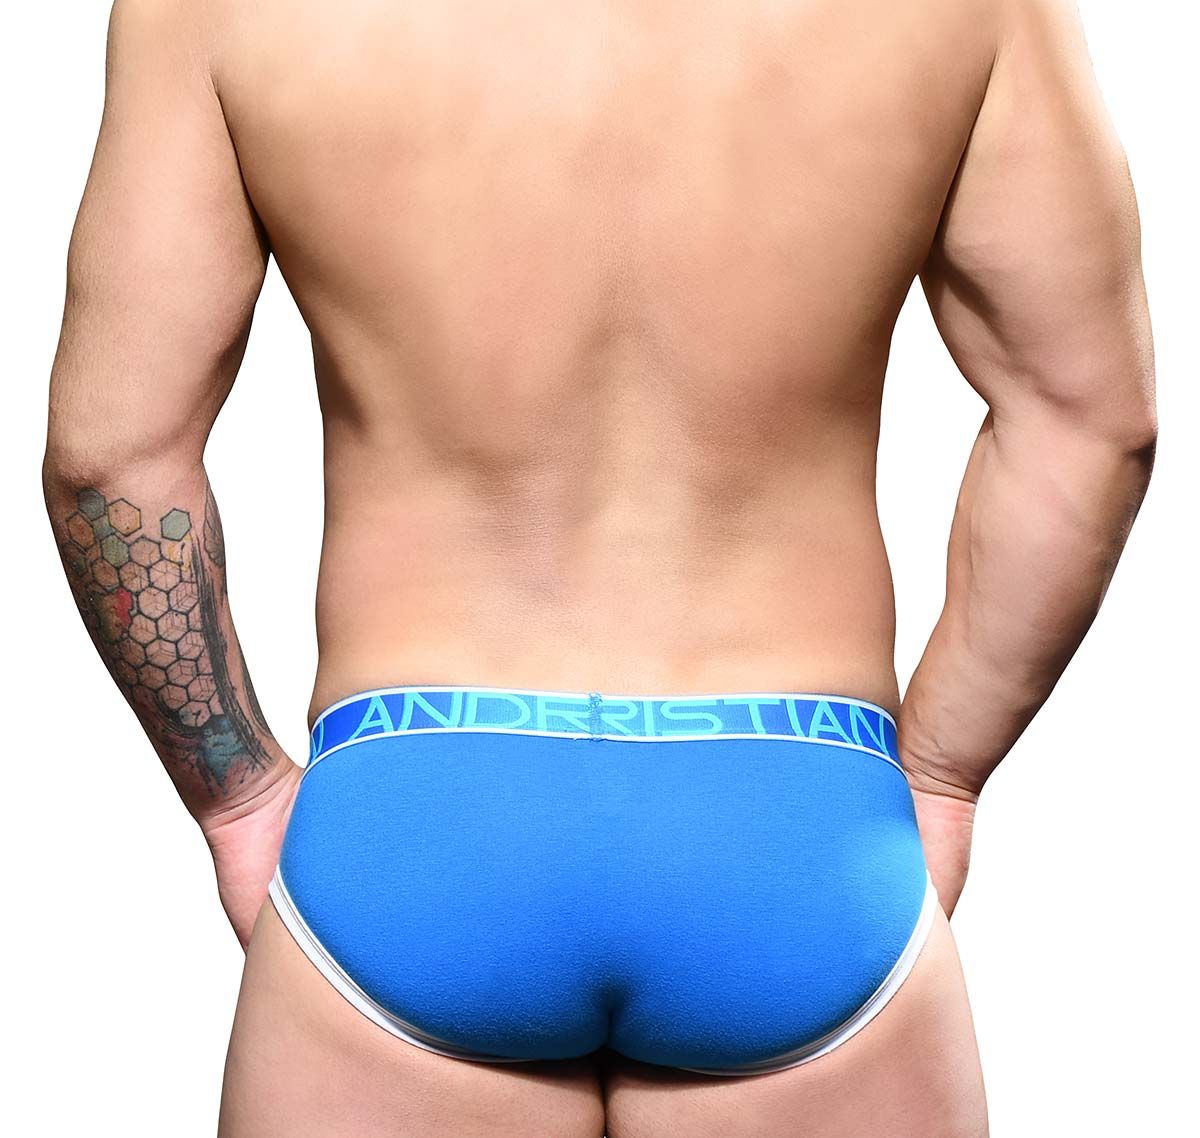 Andrew Christian Slip FLY TAGLESS BRIEF w/ ALMOST NAKED 92187, blu